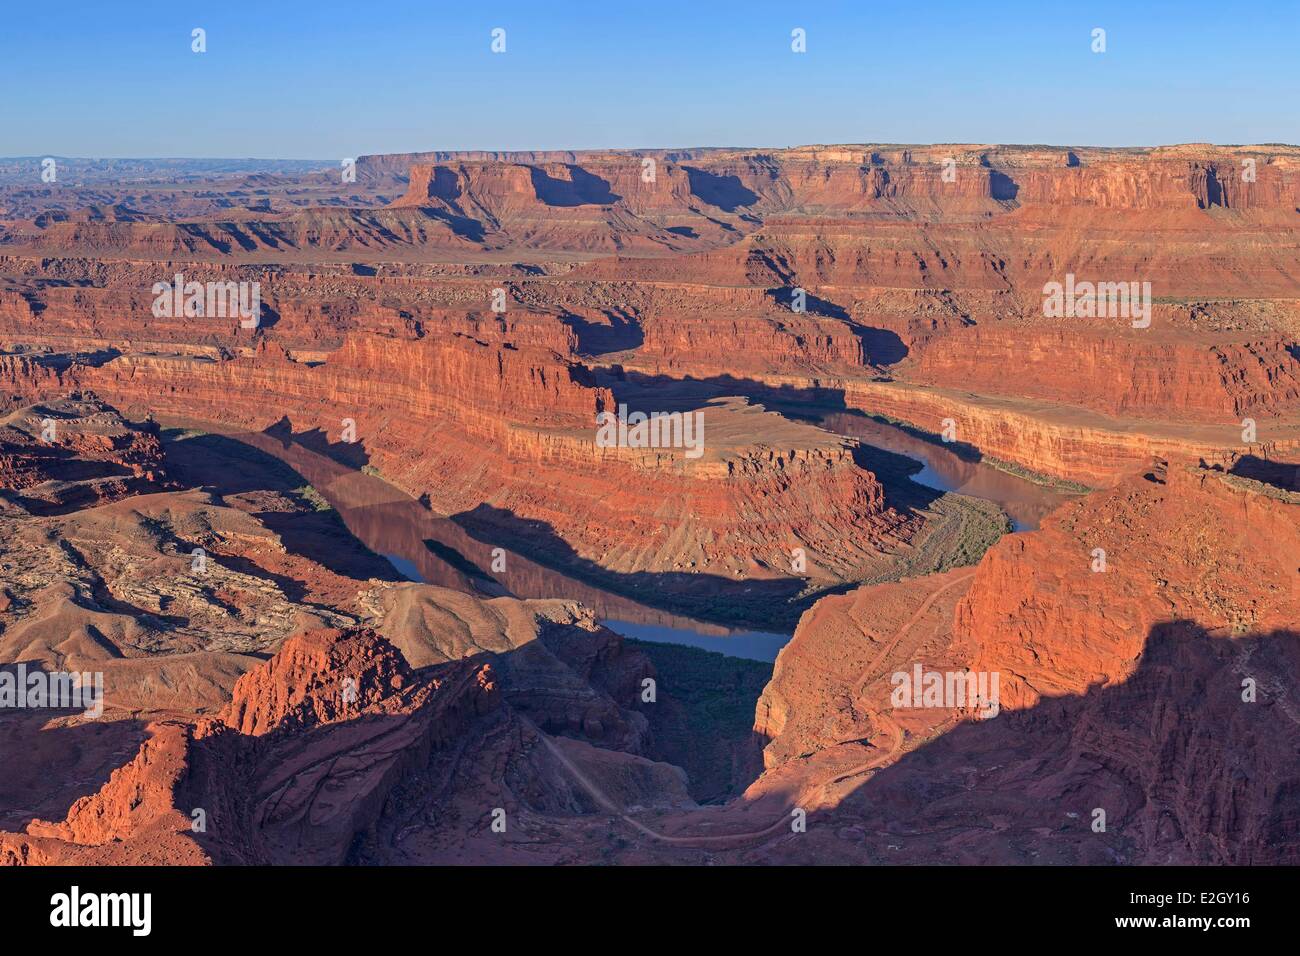 United States Utah Colorado Plateau Dead Horse Point State Park near Canyonlands National Park Colorado River at sunrise Stock Photo